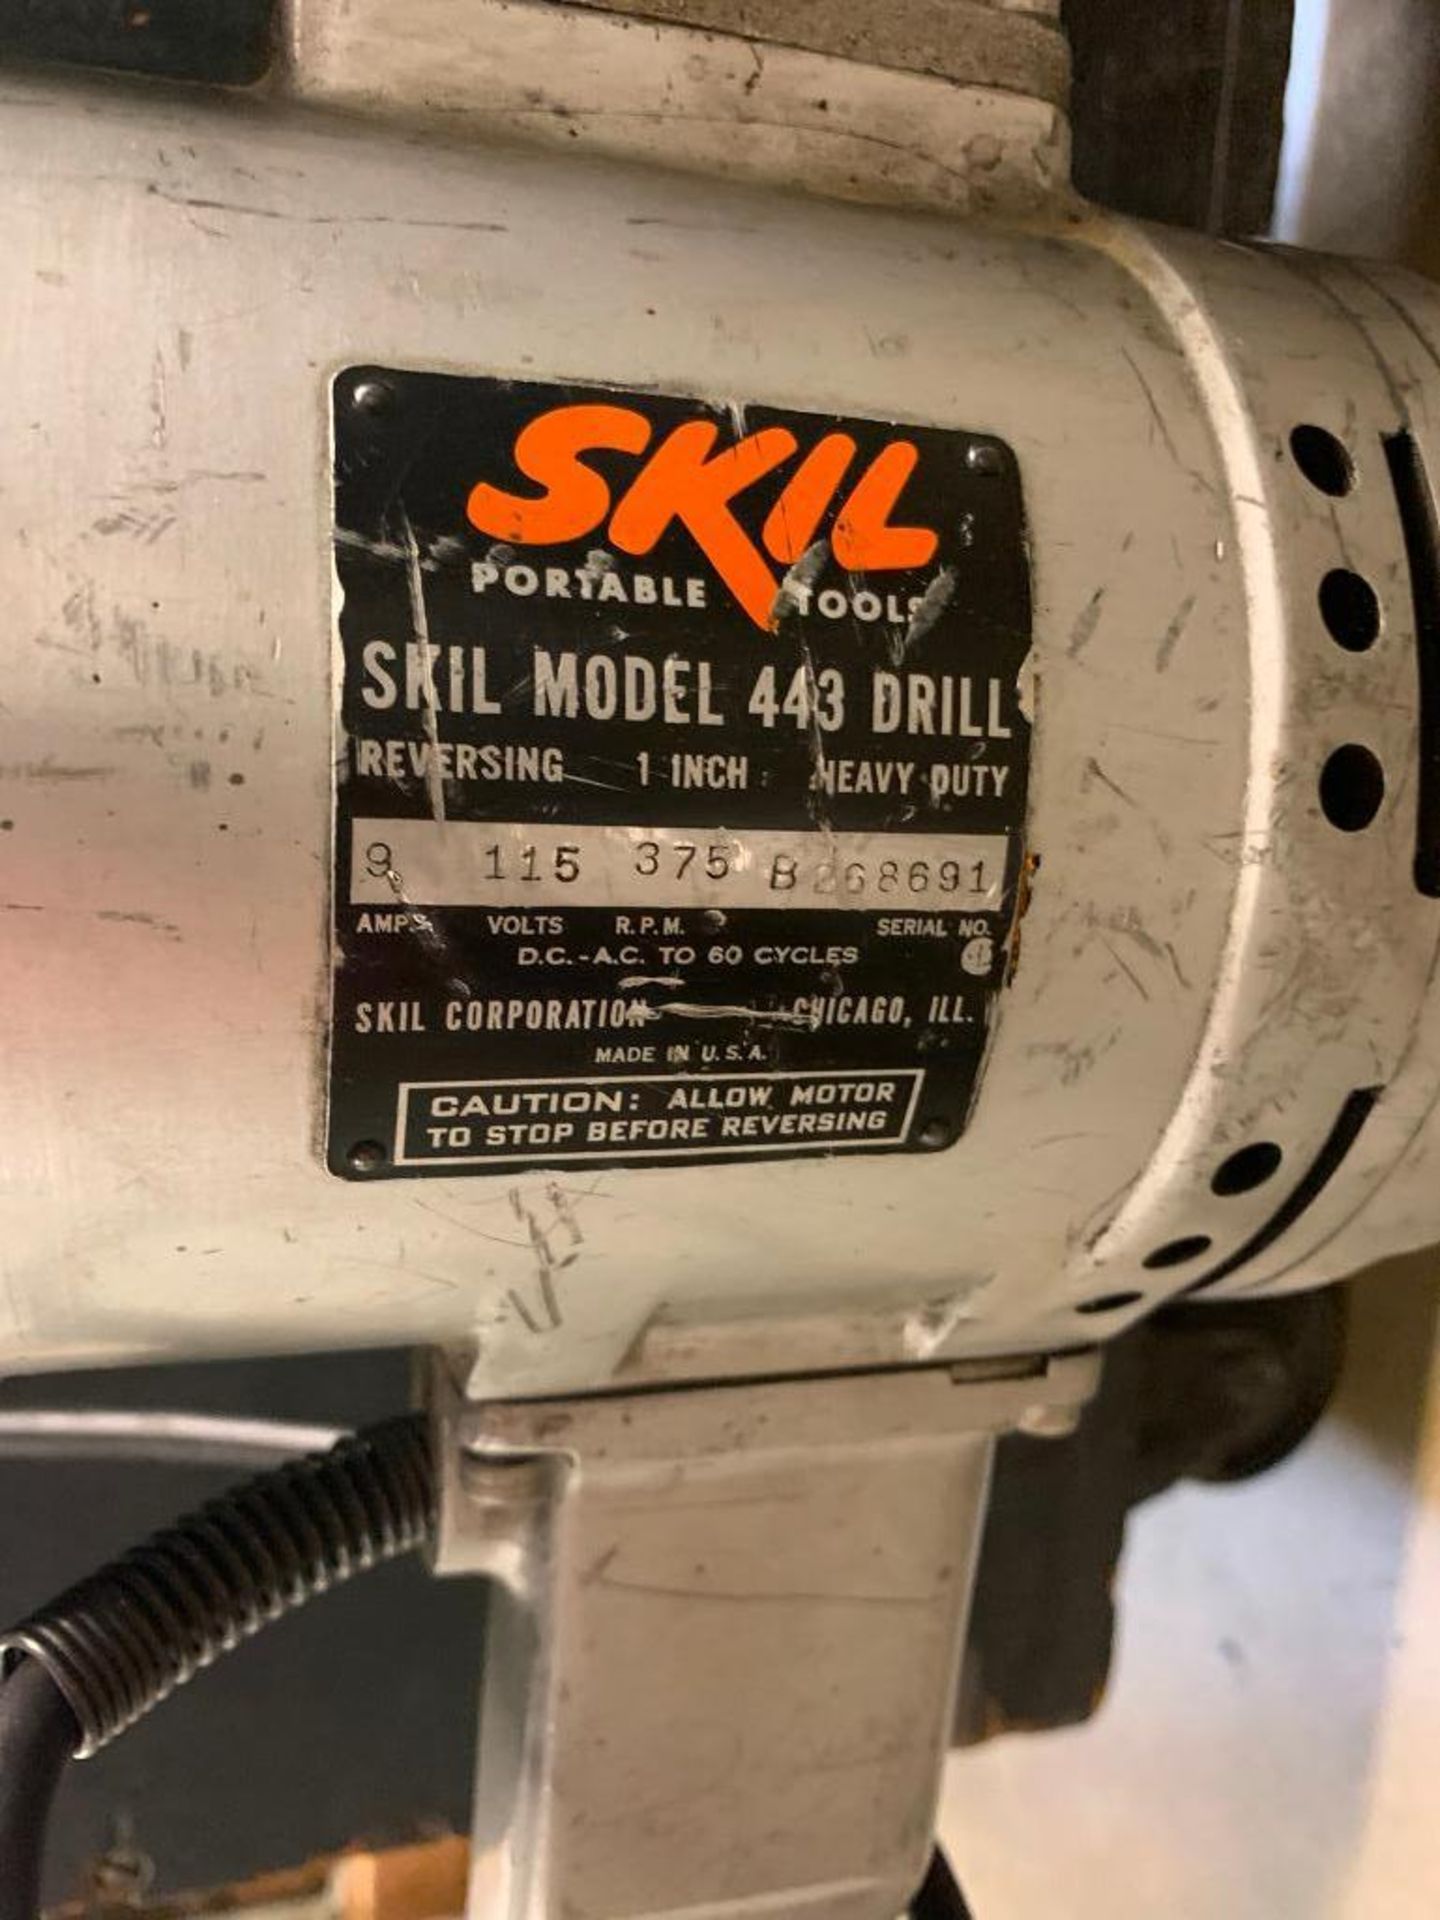 Bux/Skil Electromagnetic Drill, Skil Model 443 Drill - Image 5 of 7